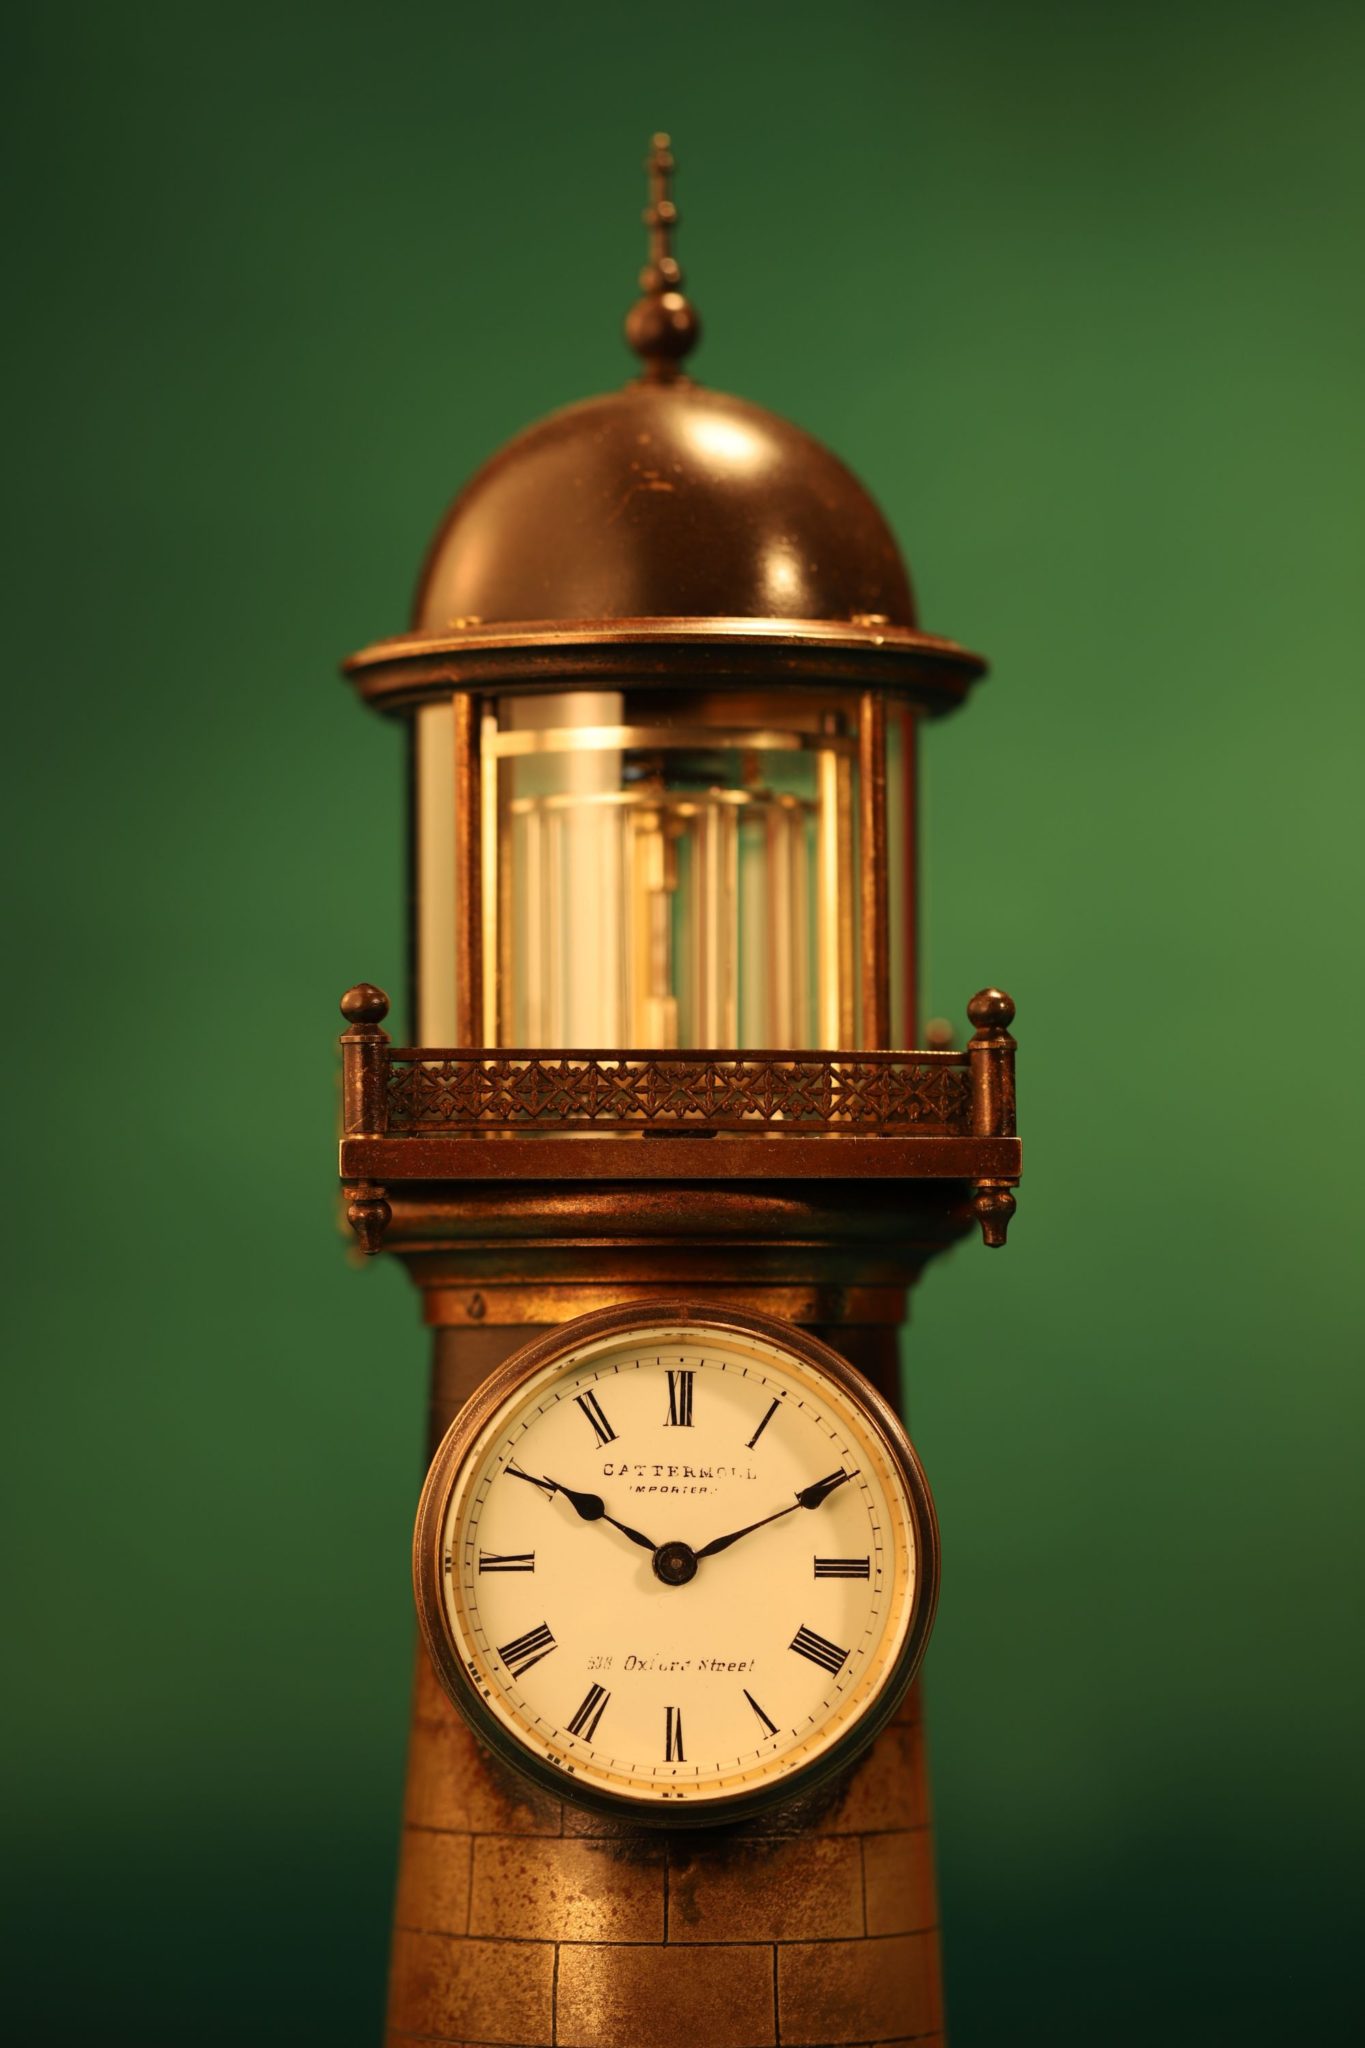 Image of Industrial Series Lighthouse Clock by Guilmet No 249 c1870